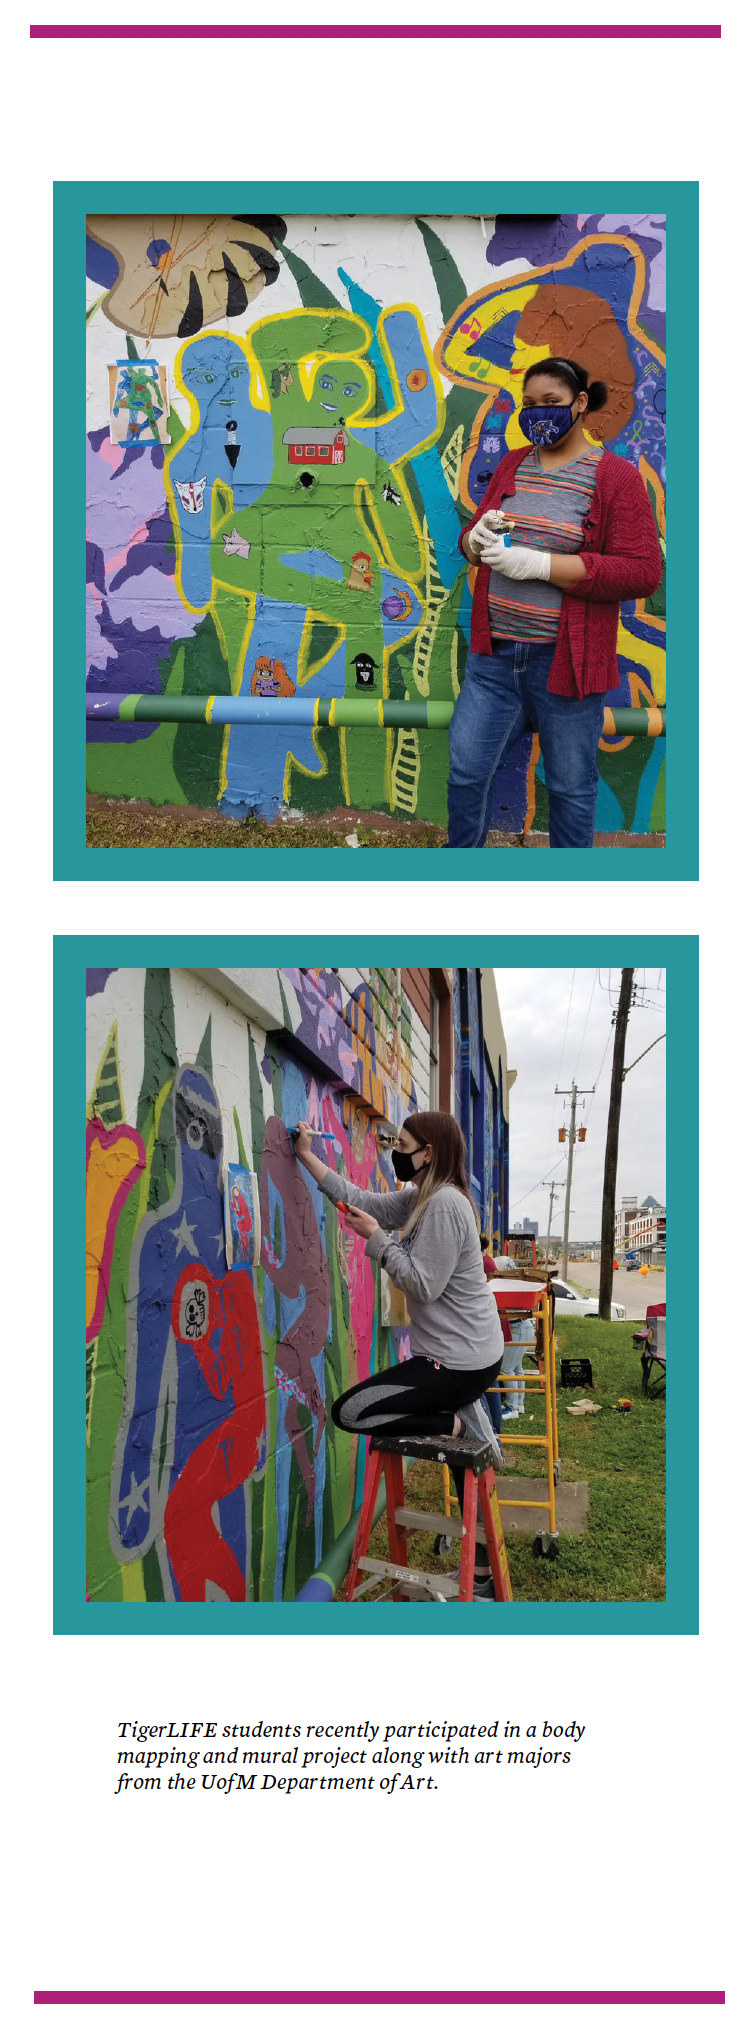 TigerLIFE students recently participated in a body mapping and mural project along with art majors from the UofM Department of Art.